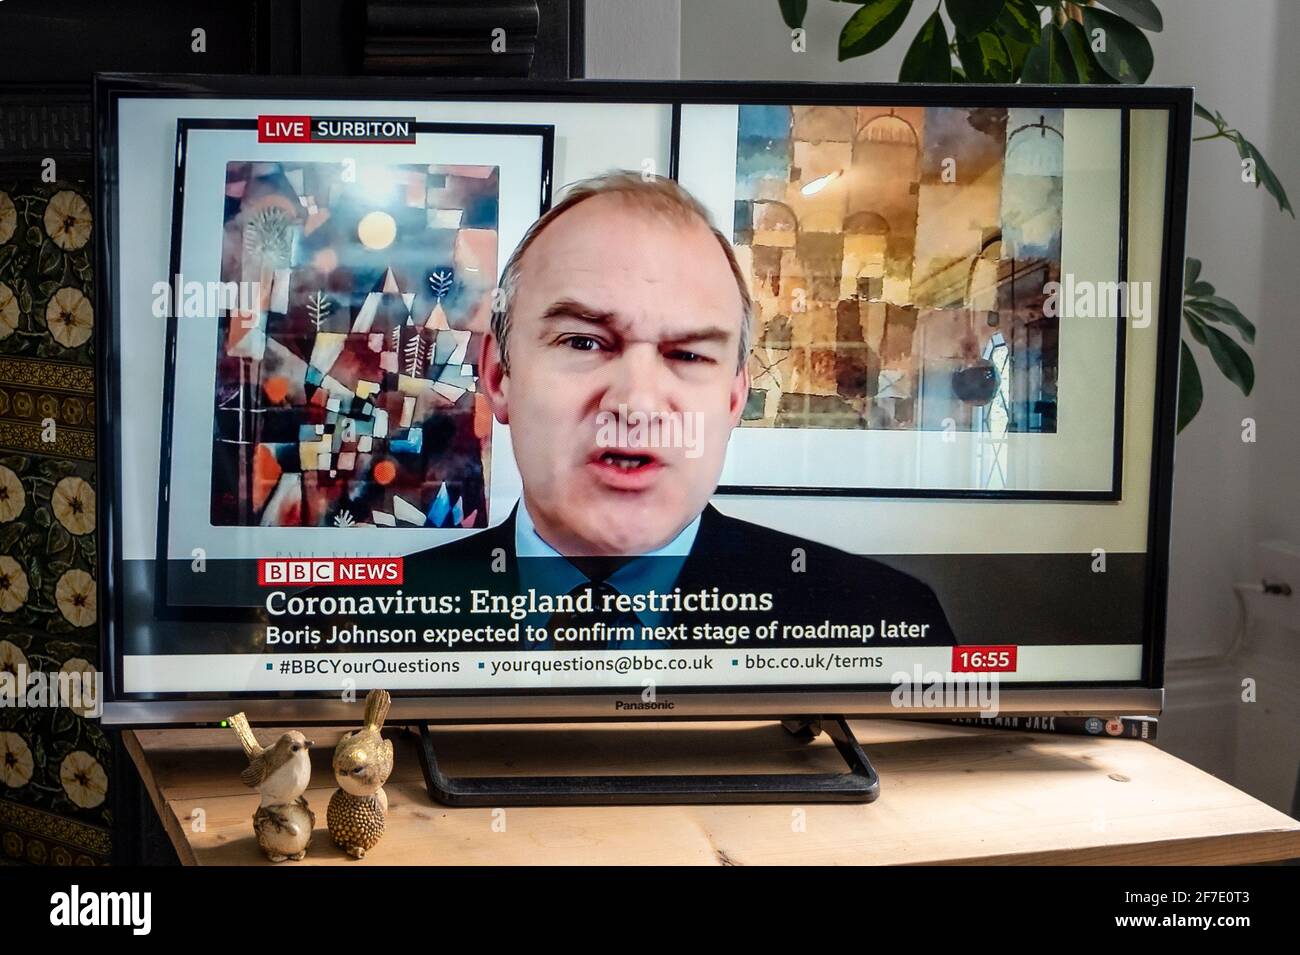 Sir Ed Davey, leader of the Liberal Democratic party in the UK, being interviewed about Covid restrictions on BBC news. Stock Photo